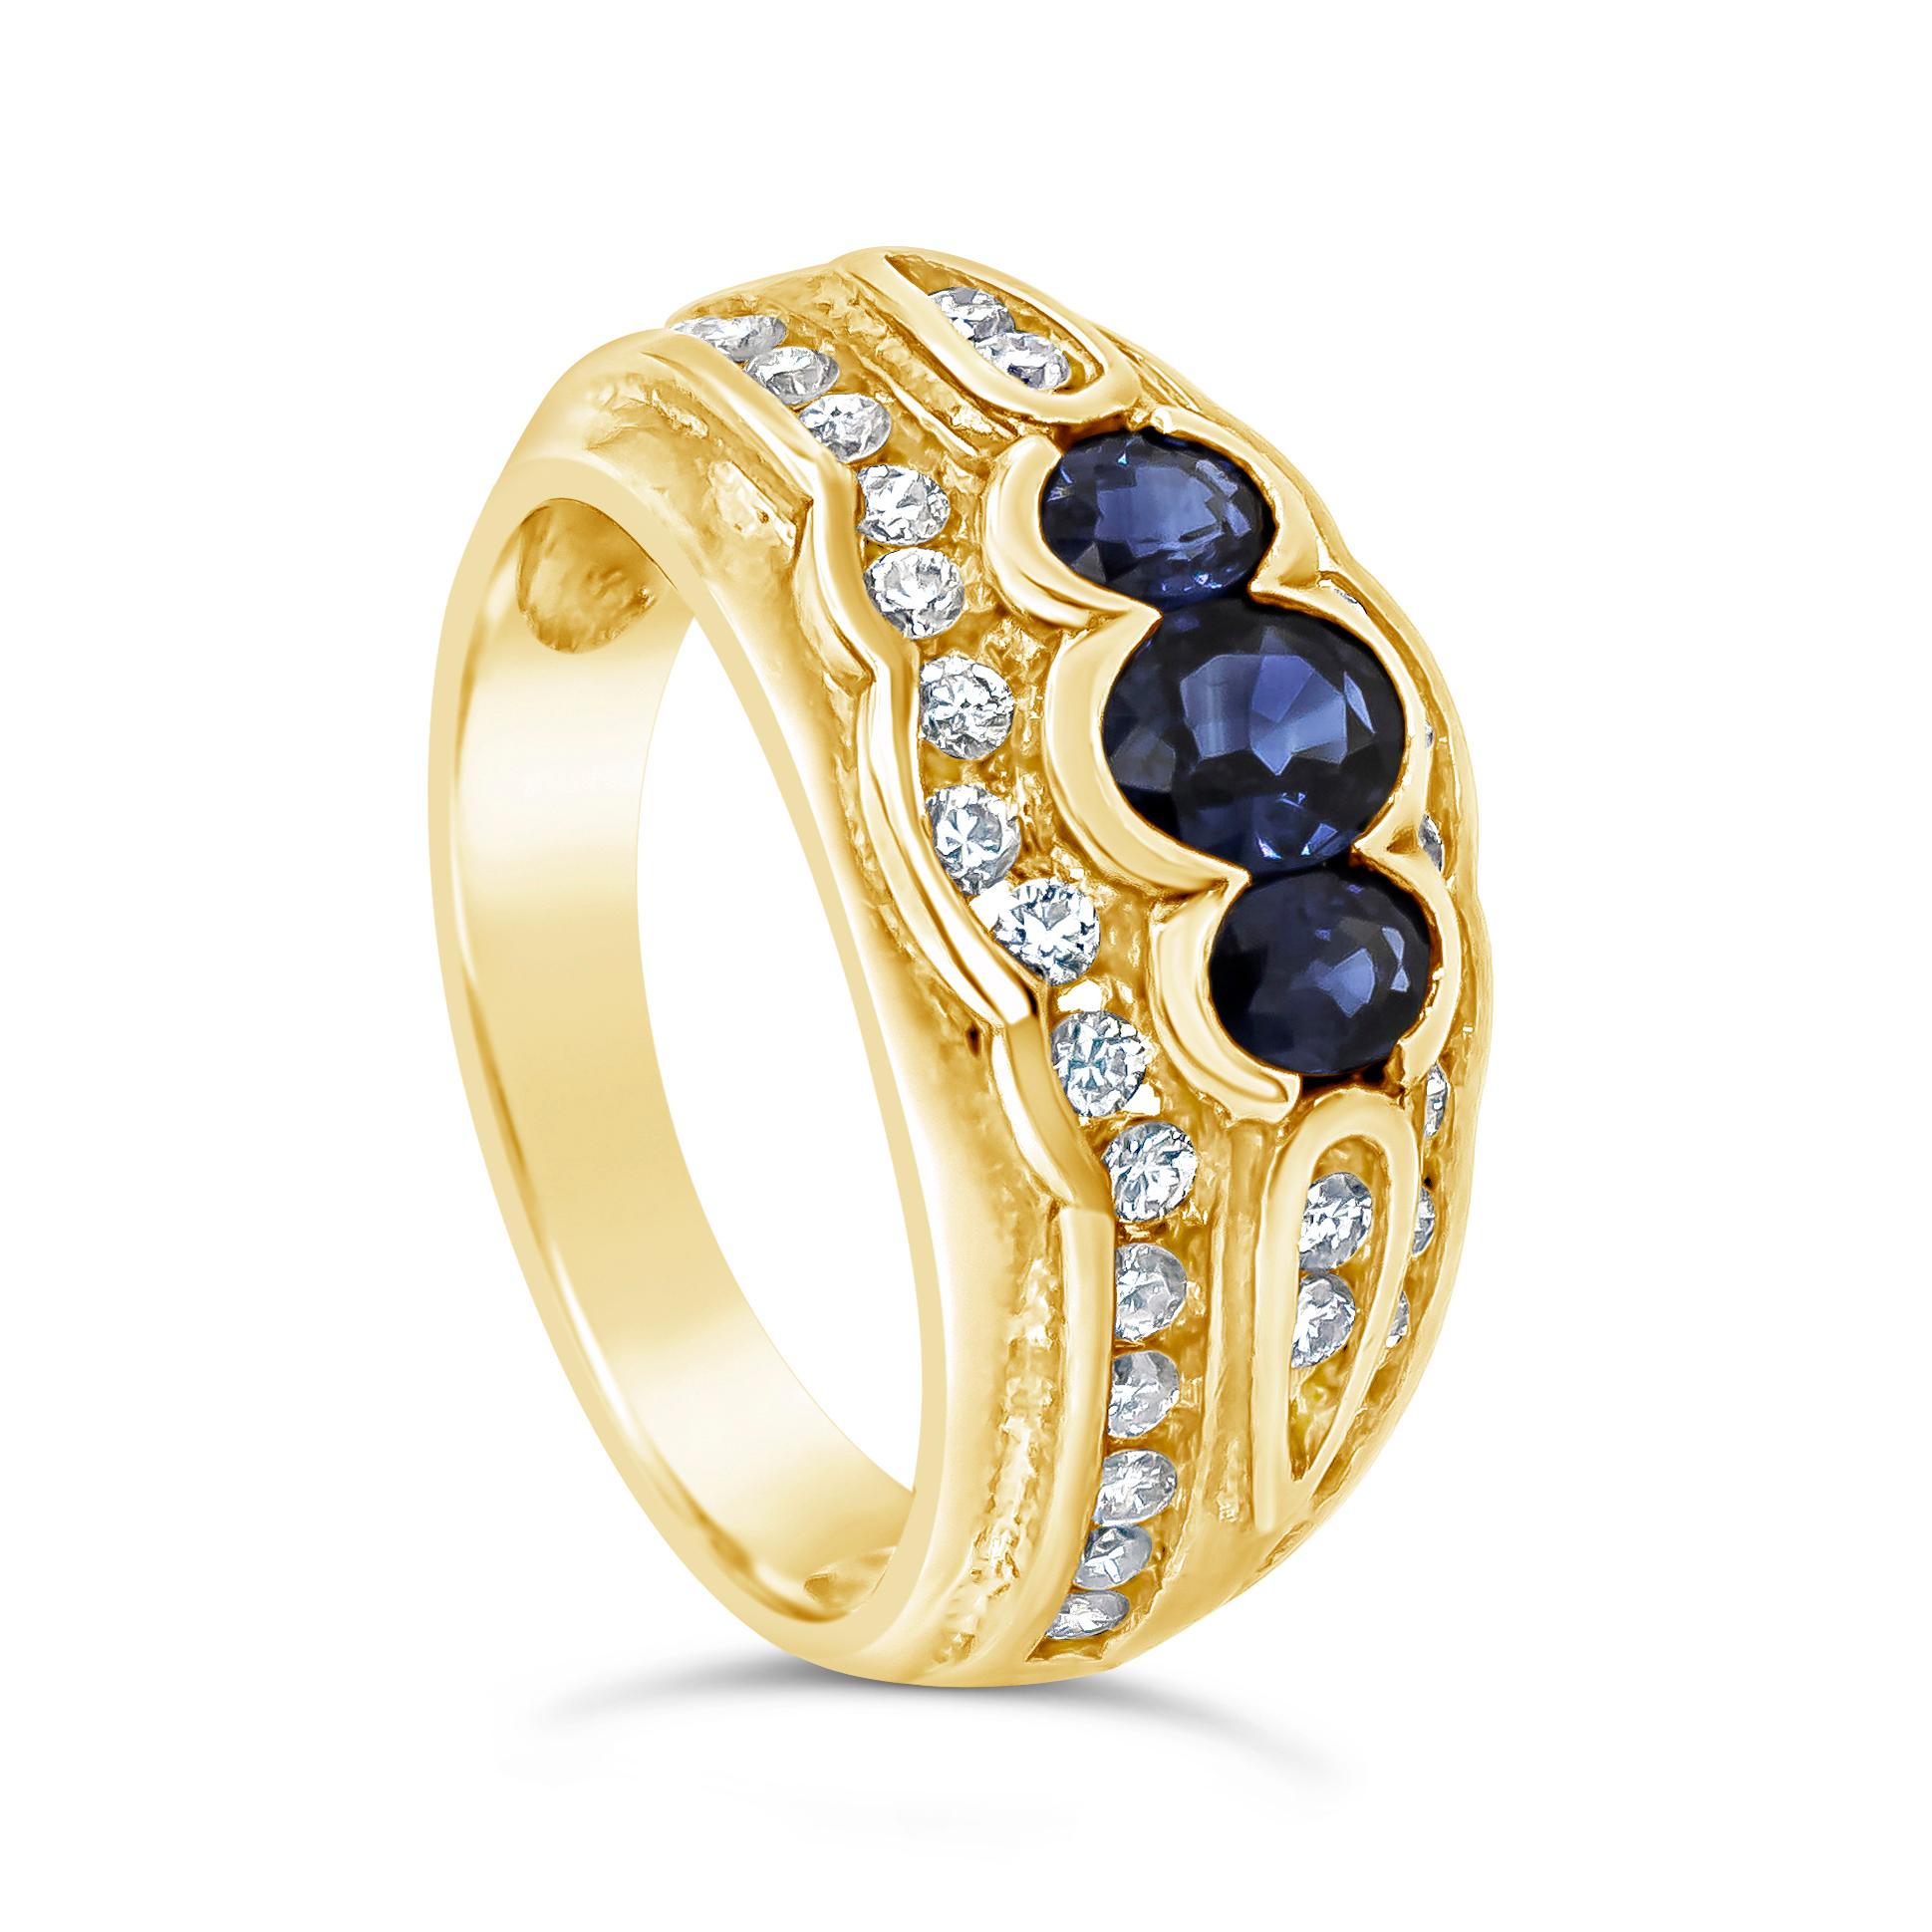 A gorgeous and fashionable 18 karat yellow gold ring showcasing three oval cut blue sapphires, accented by round brilliant diamonds. Sapphires weigh 0.80 carats total; diamonds weigh 0.40 carats total. 